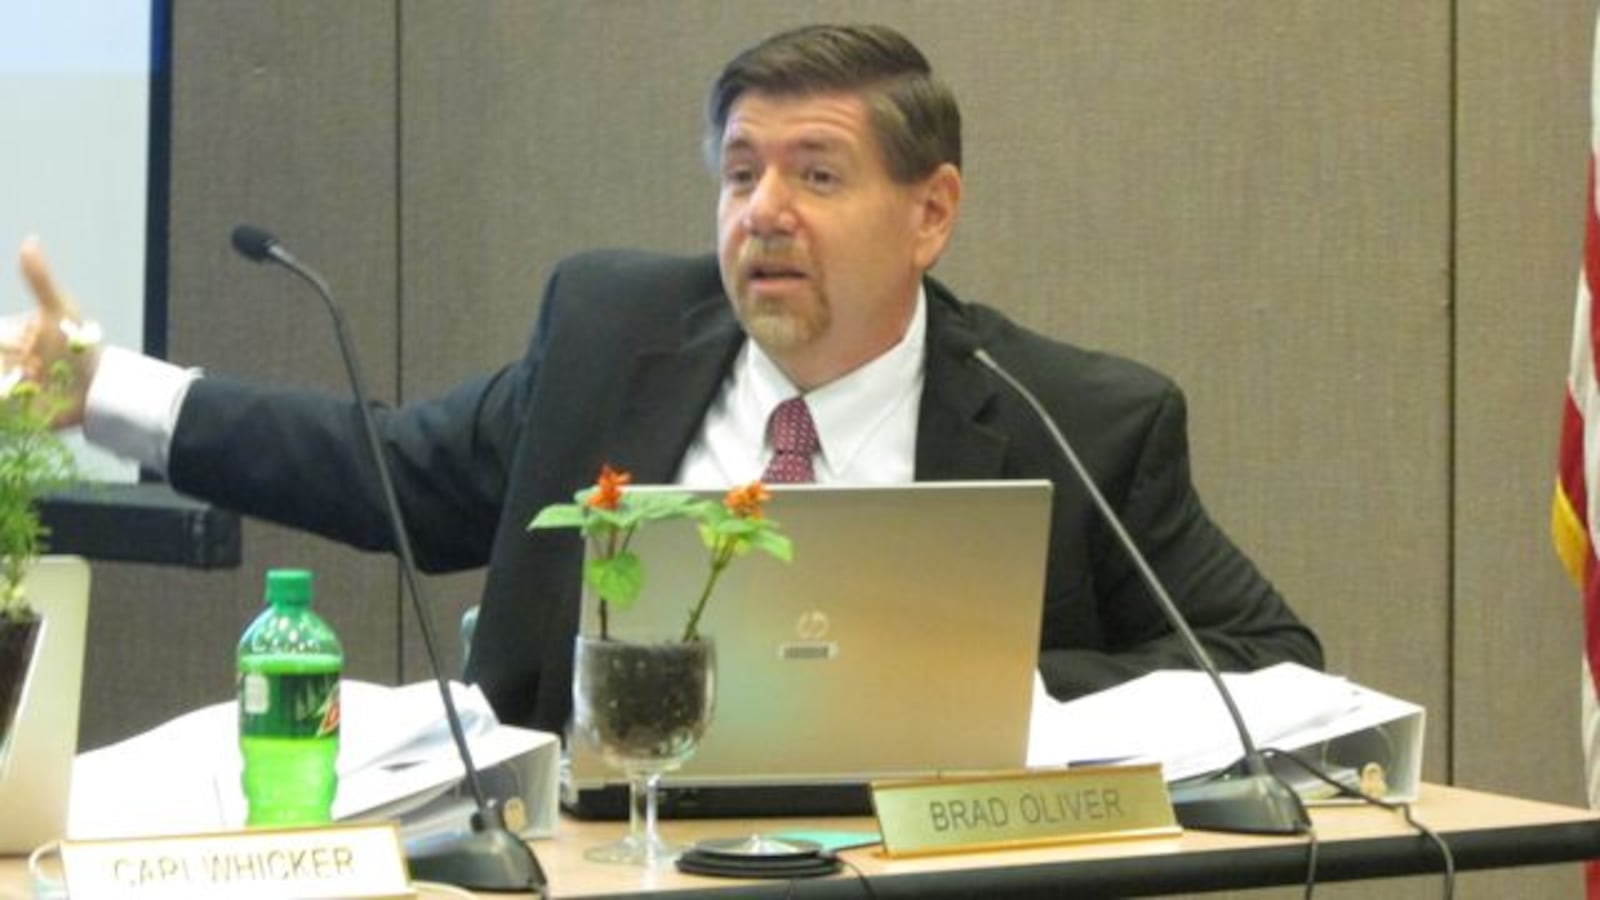 Indiana State Board member Brad Oliver, shown at a board meeting in May, testified for a bill that would shift authority away from the Indiana Department of Education